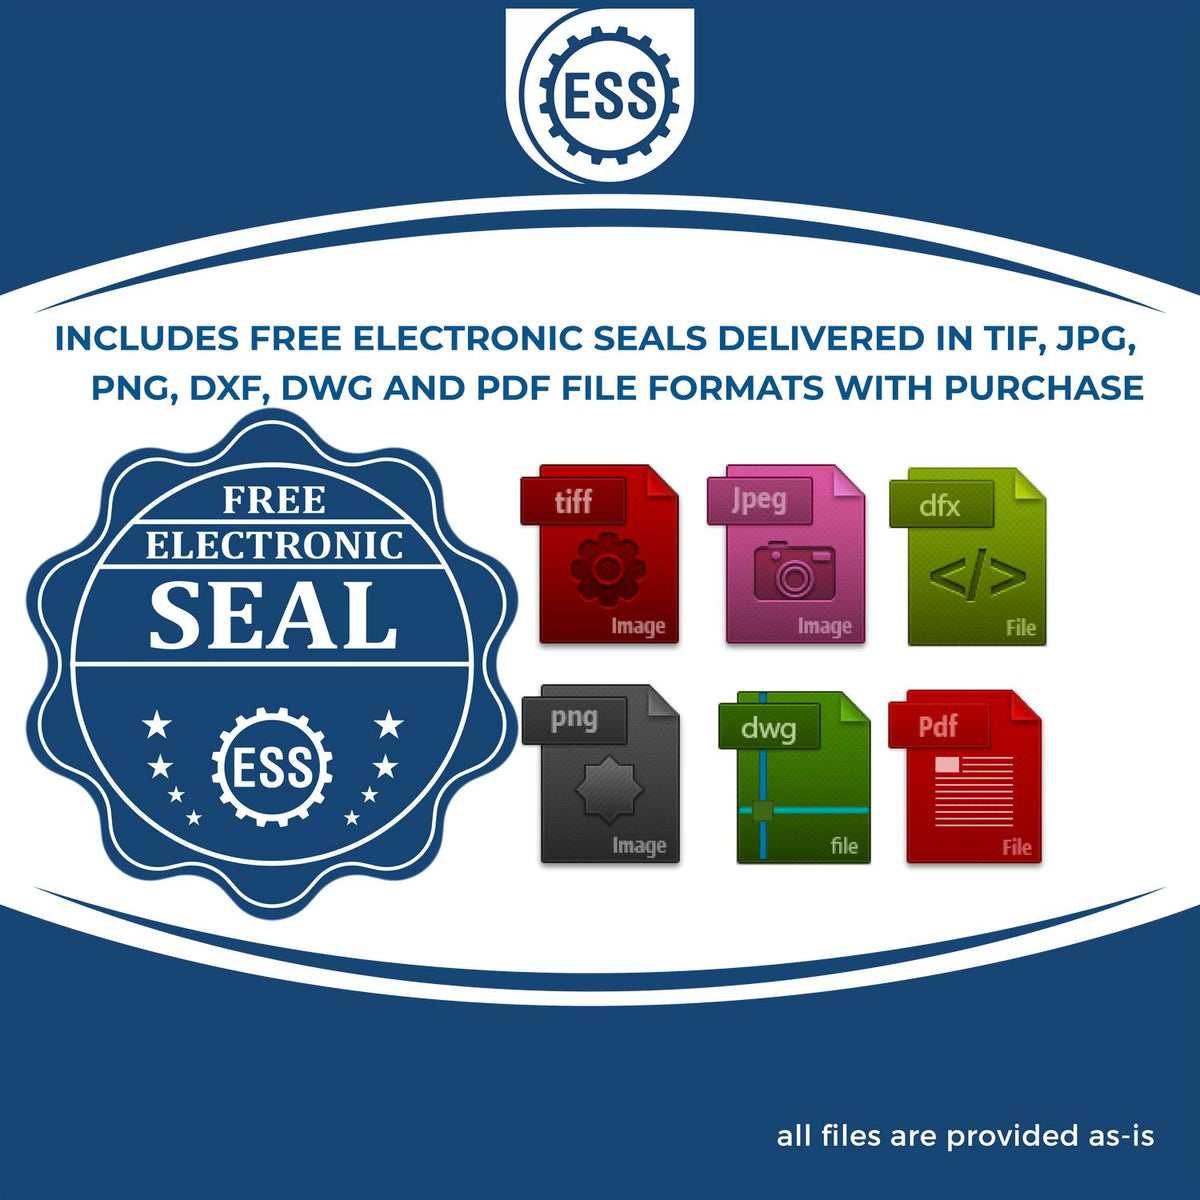 An infographic for the free electronic seal for the Handheld Nevada Professional Engineer Embosser illustrating the different file type icons such as DXF, DWG, TIF, JPG and PNG.